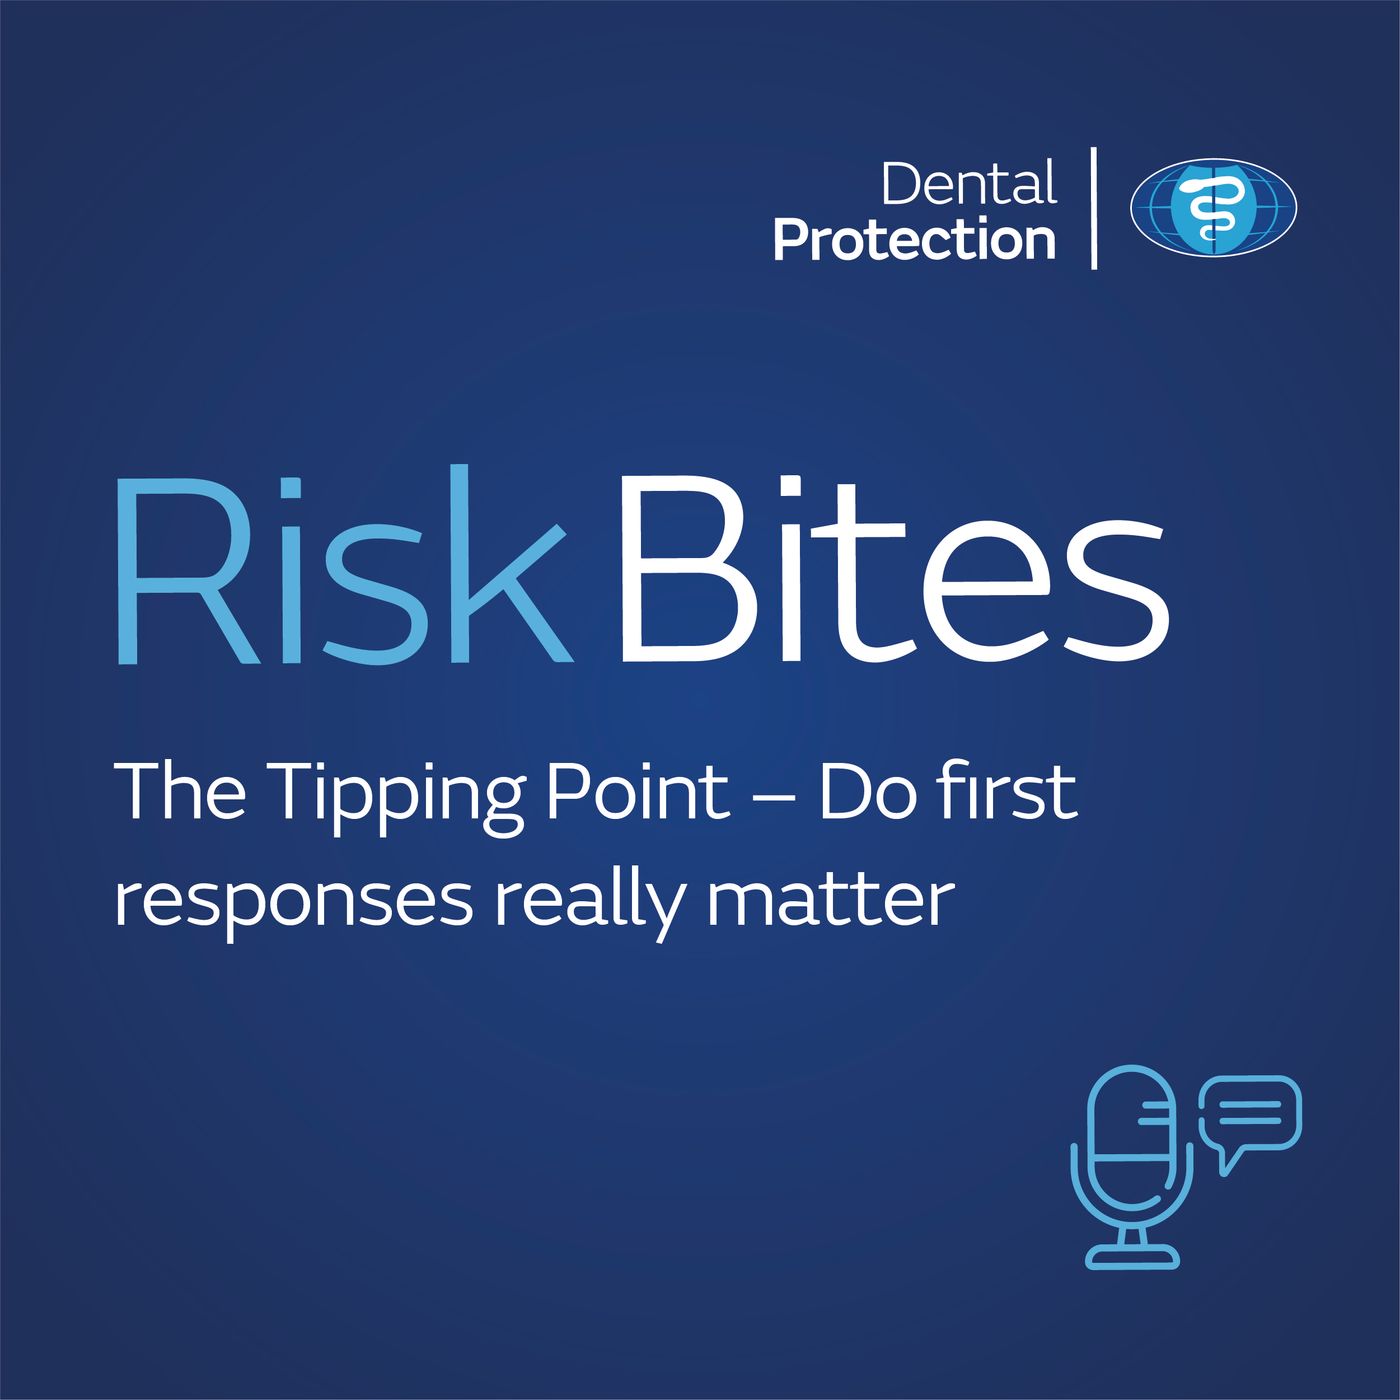 RiskBites - The Tipping Point - Do first responses really matter